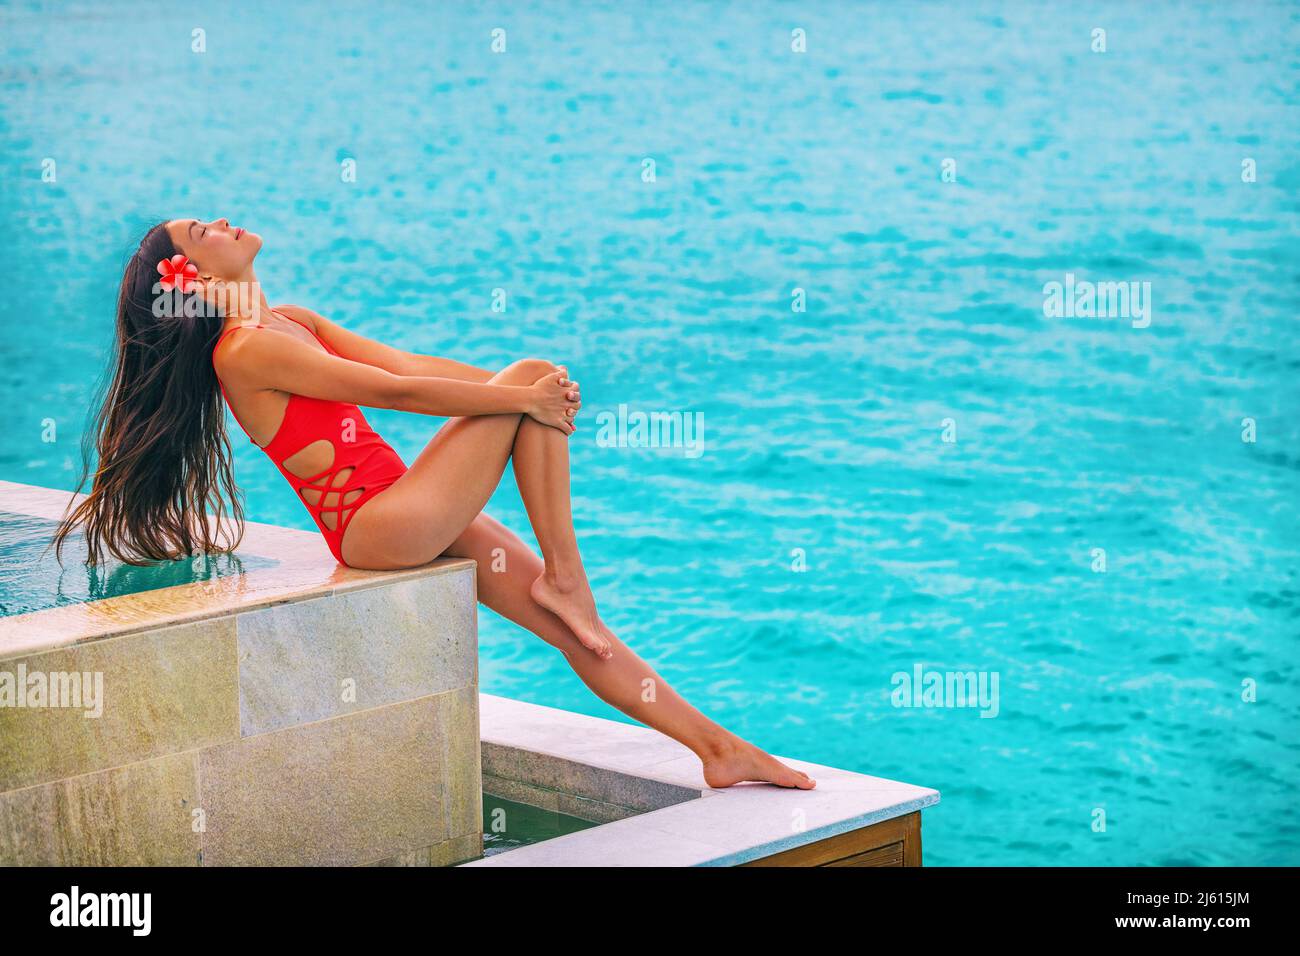 Spa woman after laser treatment with shaved legs. Luxury resort travel vacation natural beauty picture by idyllic overwater bungalow villa. Woman Stock Photo